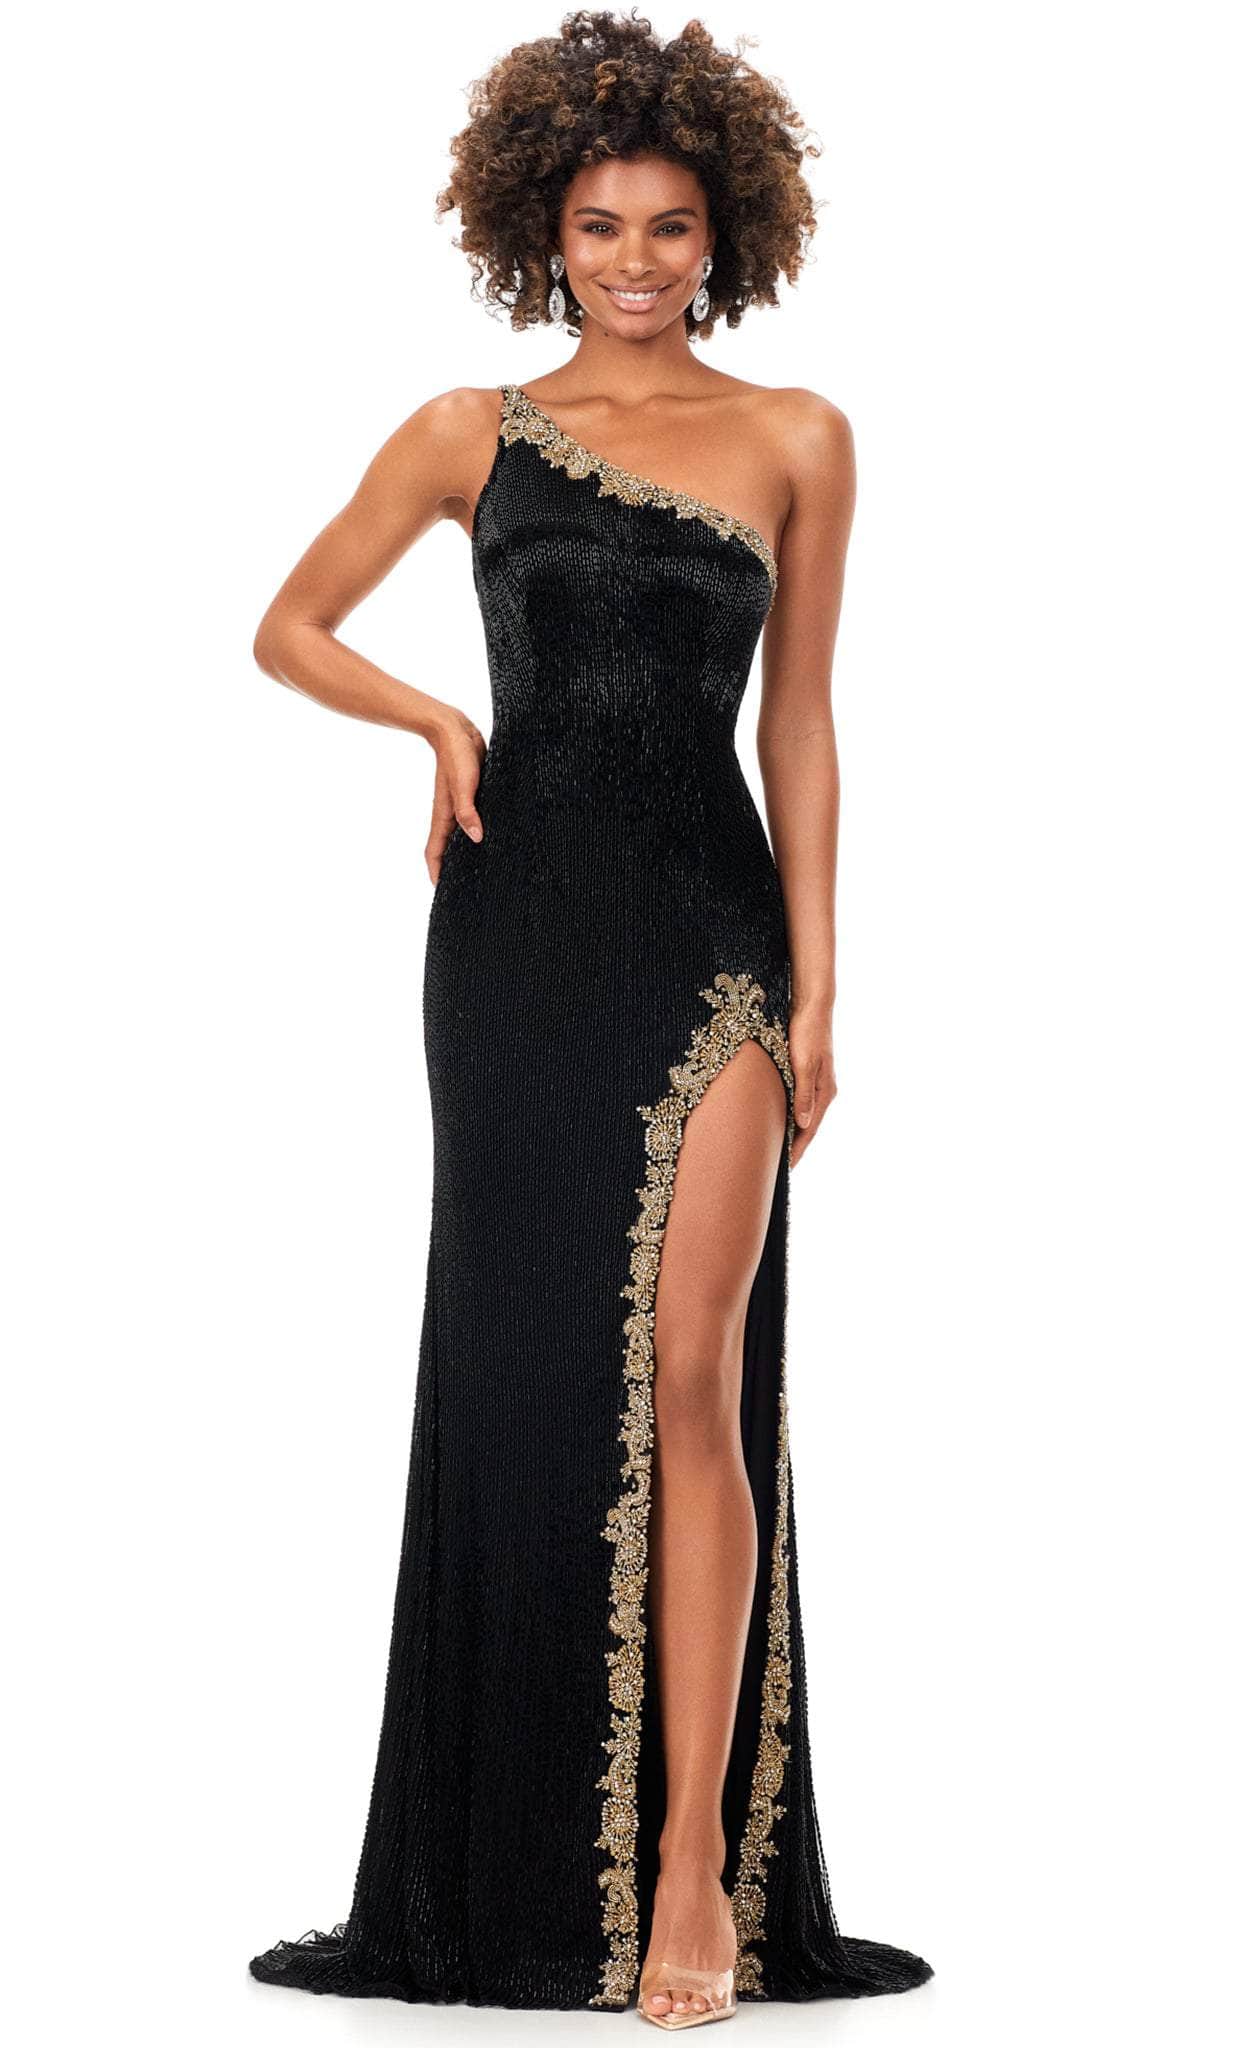 Image of Ashley Lauren 11352 - One Sleeve Beaded Evening Gown